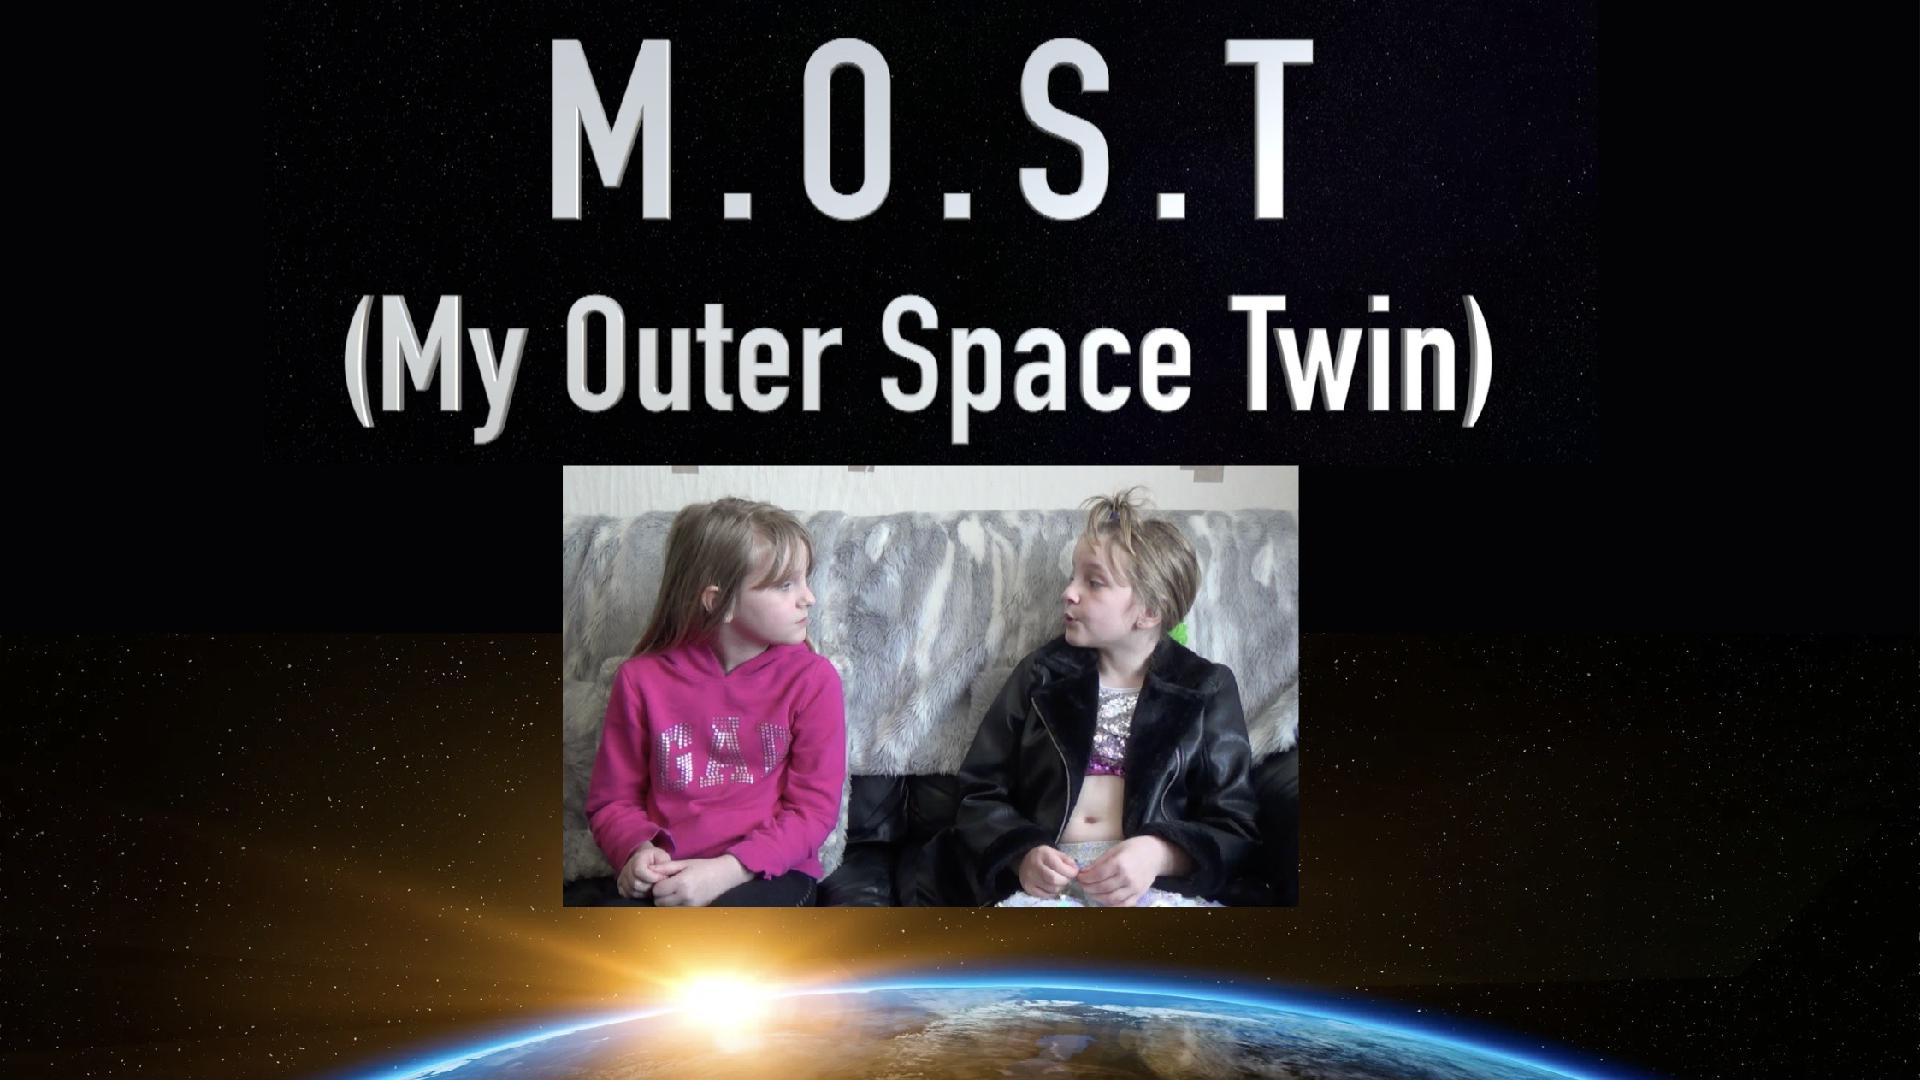 M.O.S.T (My Outer Space Twin)